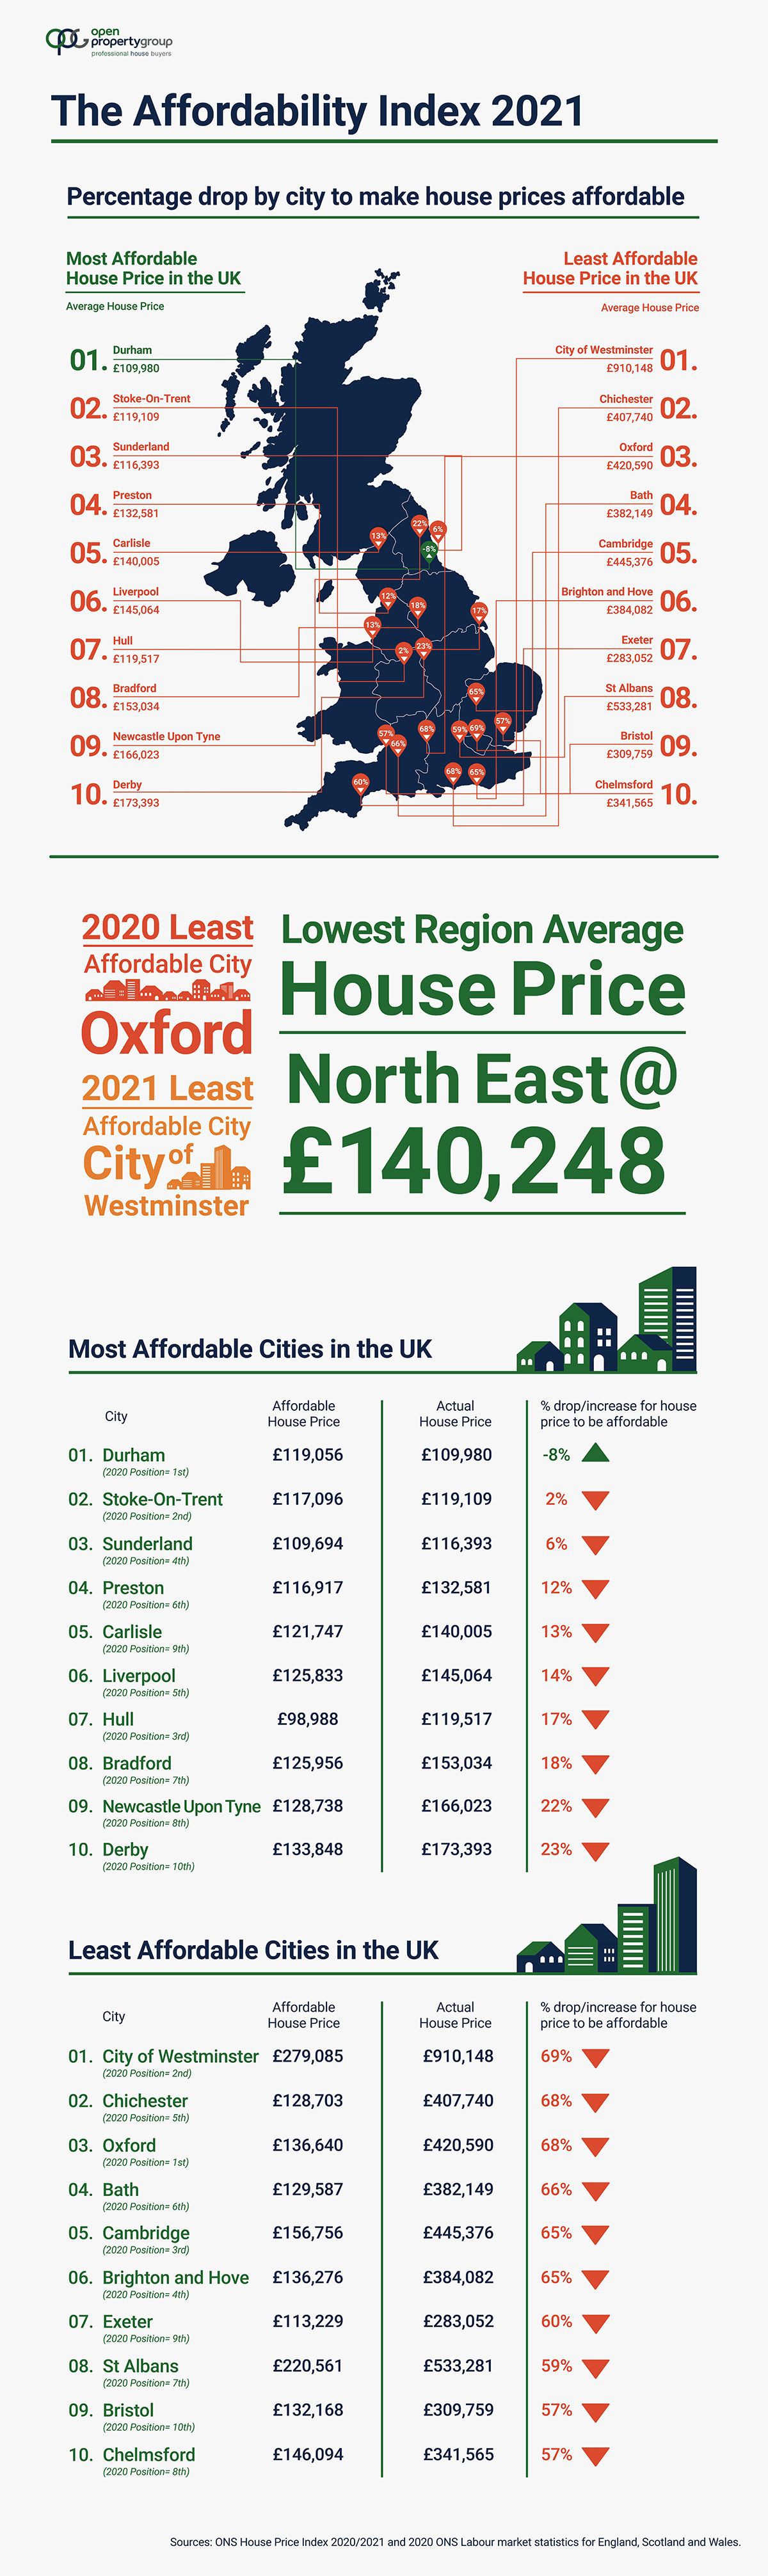 House Price Affordability Index 2021